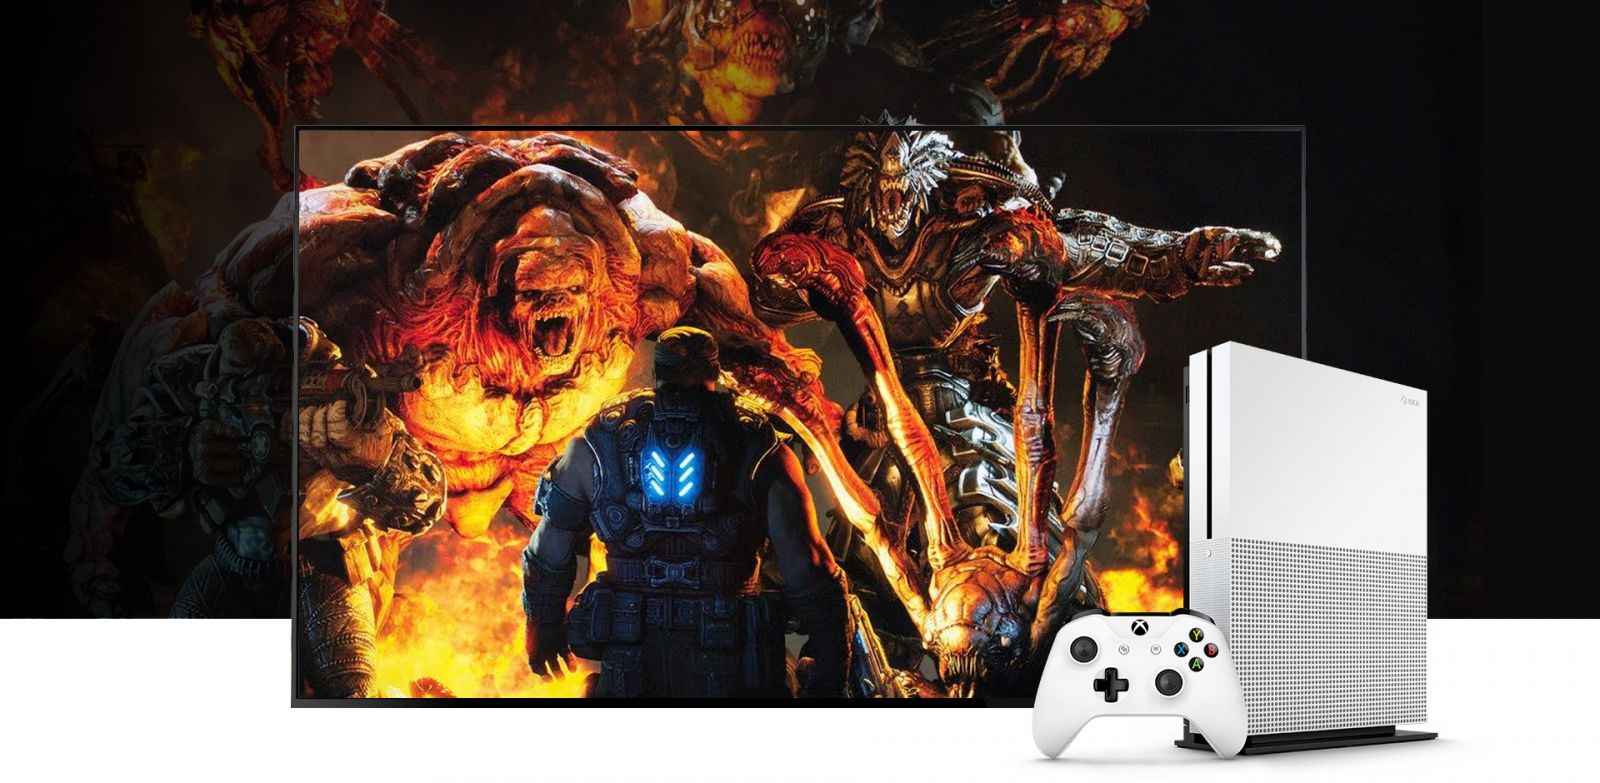 Xbox One S 2TB + Gears of War 4 image4